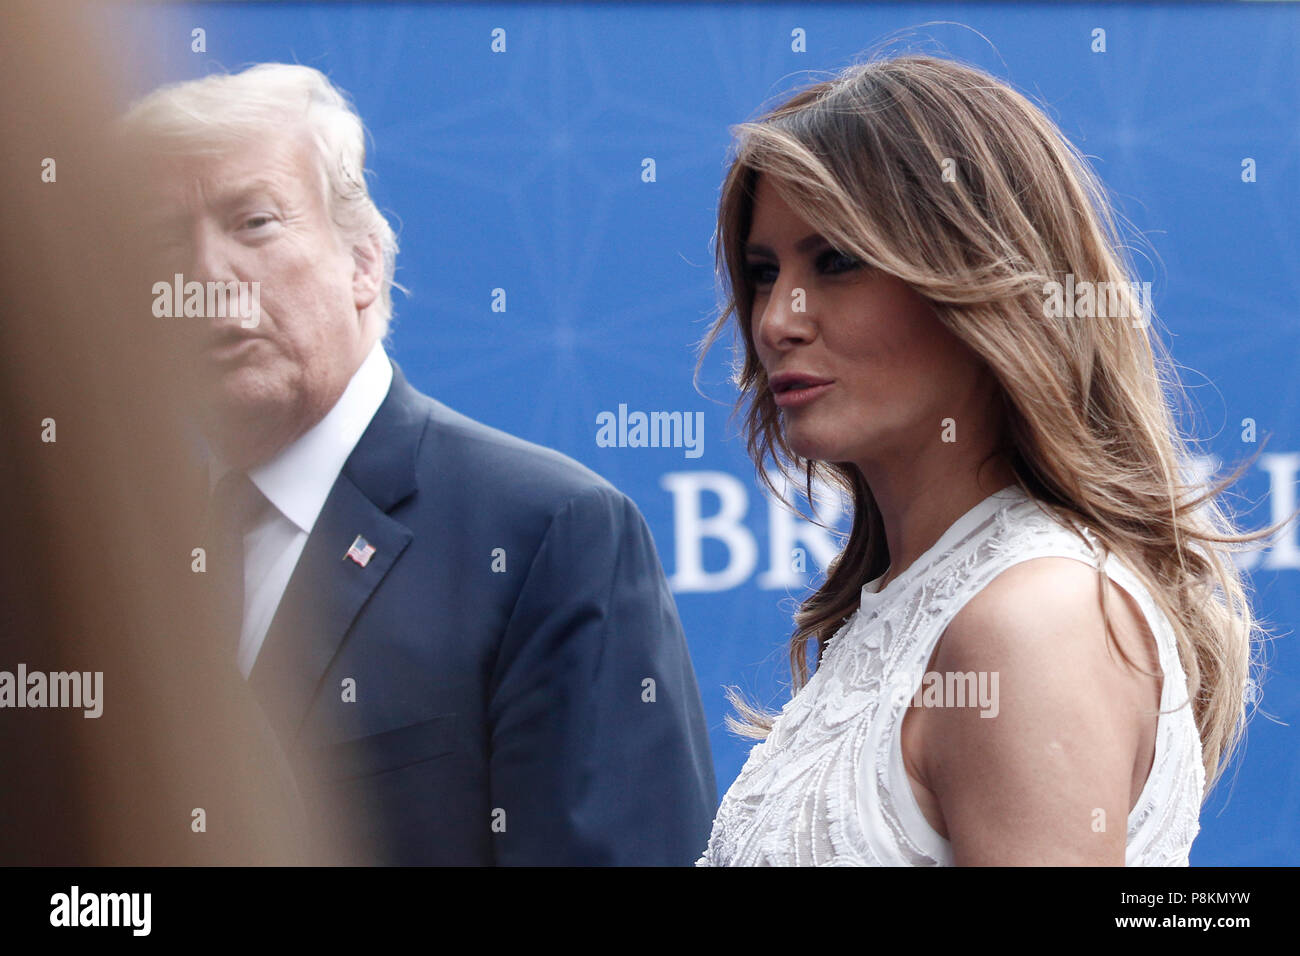 Brussels, Belgium. 11th July 2018. US President Donald Trump and First Lady of the US Melania Trump arrive for a working dinner at The Parc du Cinquantenaire in Brussels, Belgium on Jul. 11, 2018. Credit: ALEXANDROS MICHAILIDIS/Alamy Live News Stock Photo